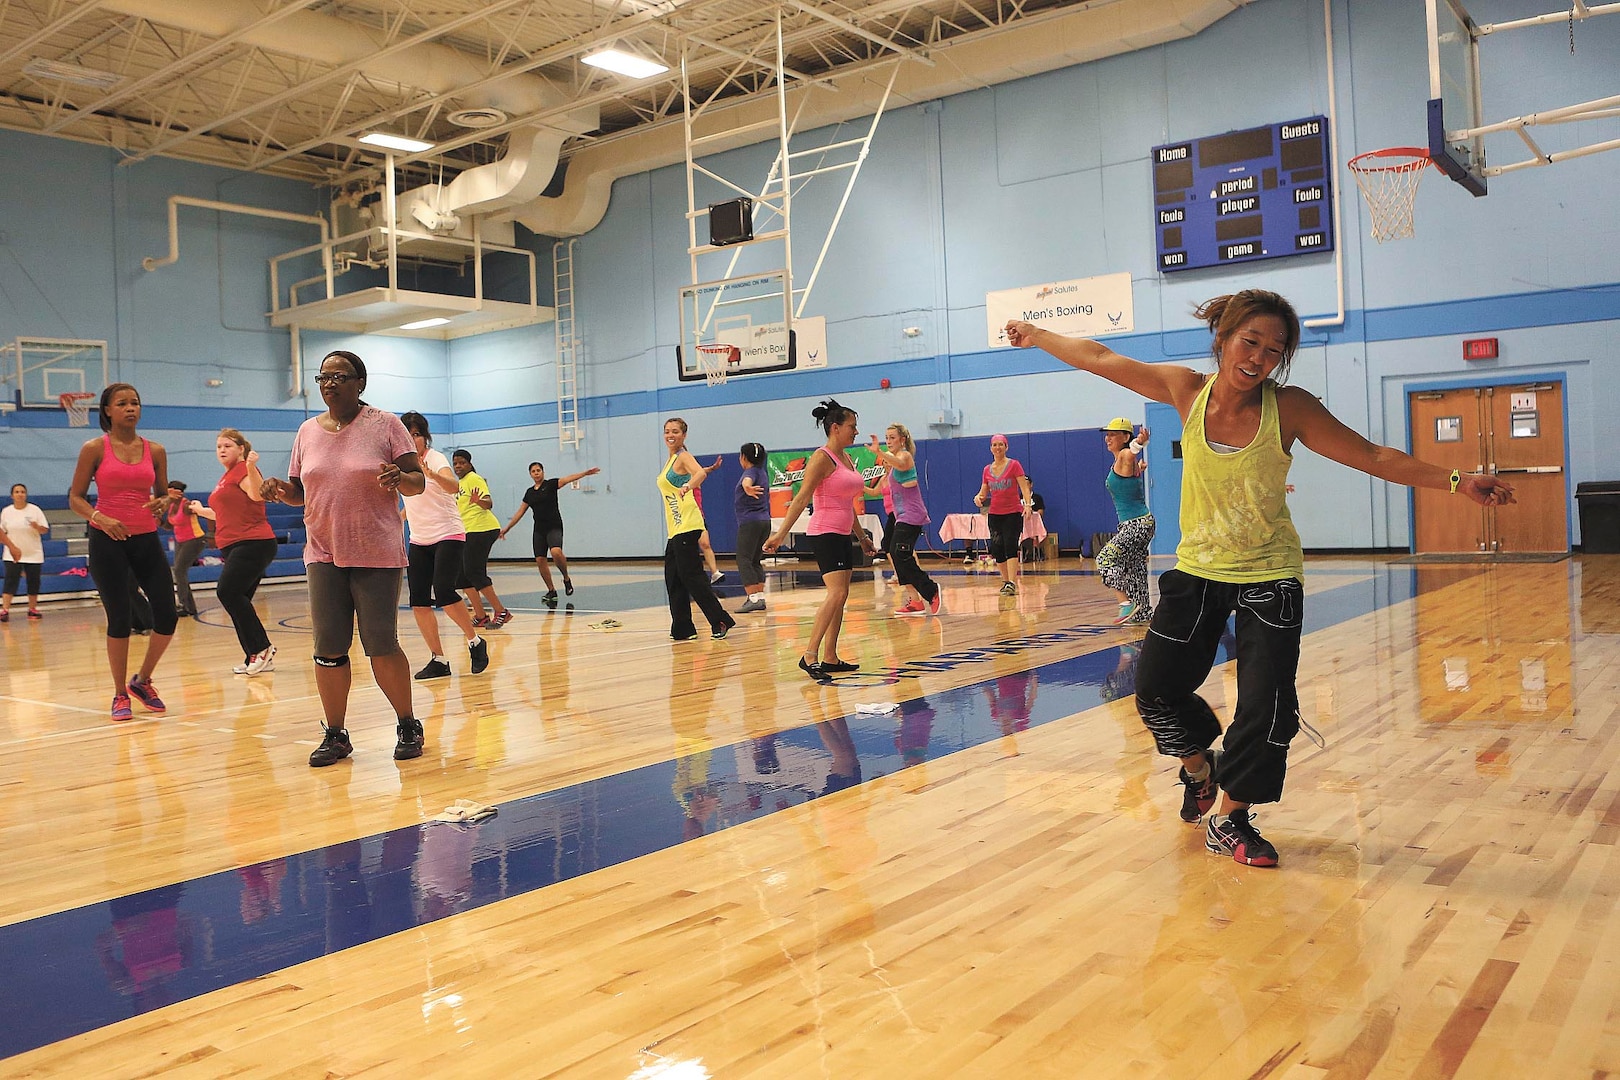 Patrons get energy boost with nonstop Zumba > Joint Base San Antonio > News